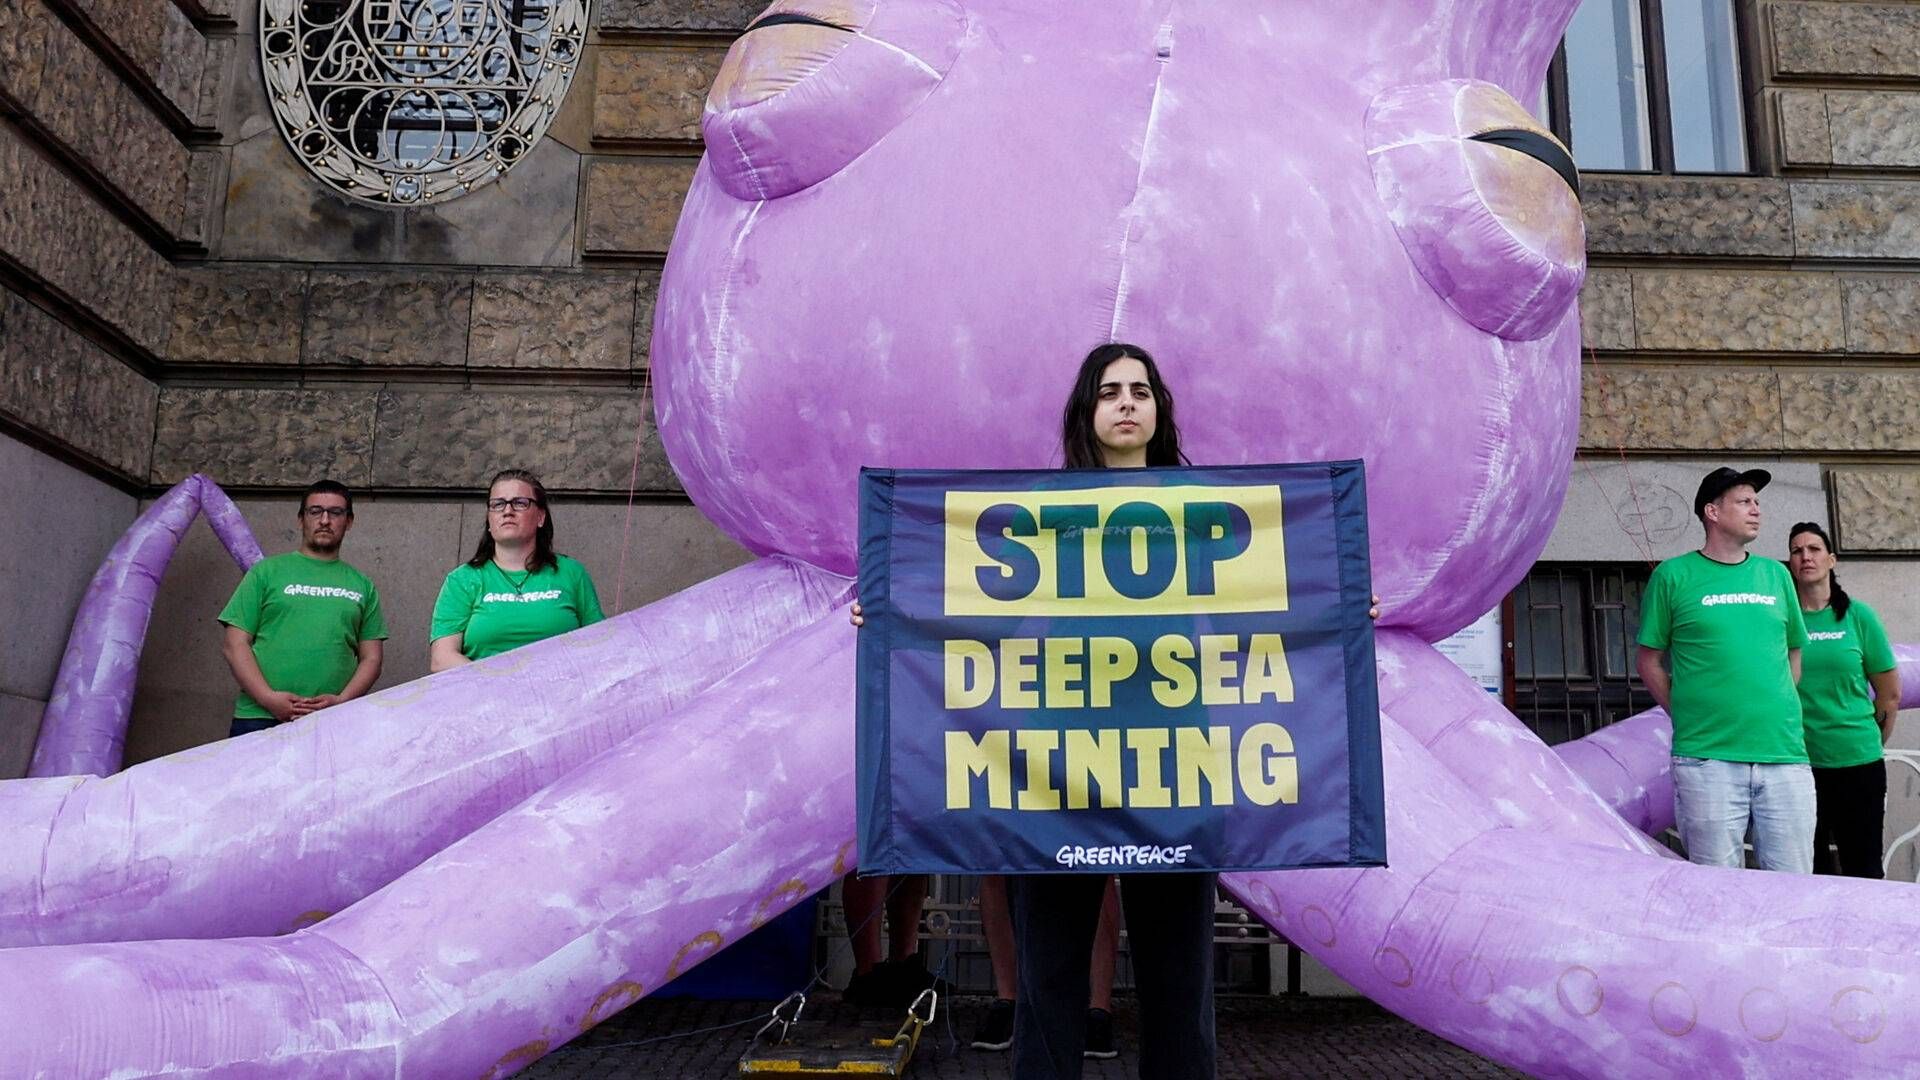 Activists call for an end to deep-sea mining during a demonstration in Prague earlier this month. | Photo: David W Cerny/Reuters/Ritzau Scanpix